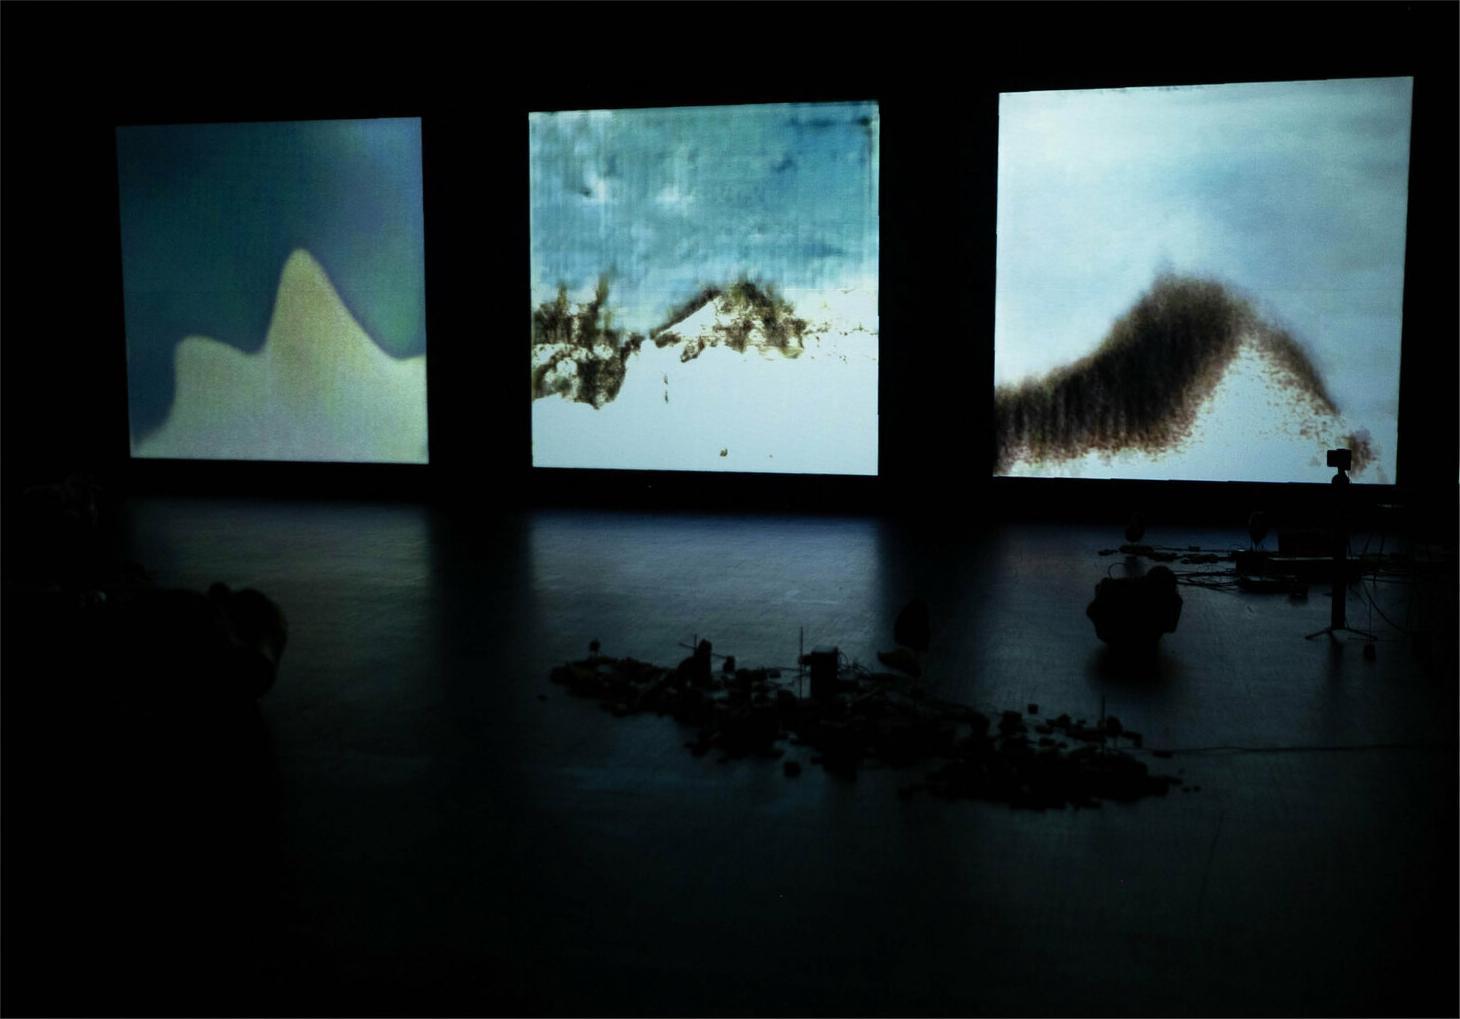 Still from 'Trust me tomorrow' showing an unlit stage with machinery just visible in the foreground but focus drawn to three lit art panels lining the back wall. The images are primarily shades of blue, white, and black in abstracted shapes that suggest motion.